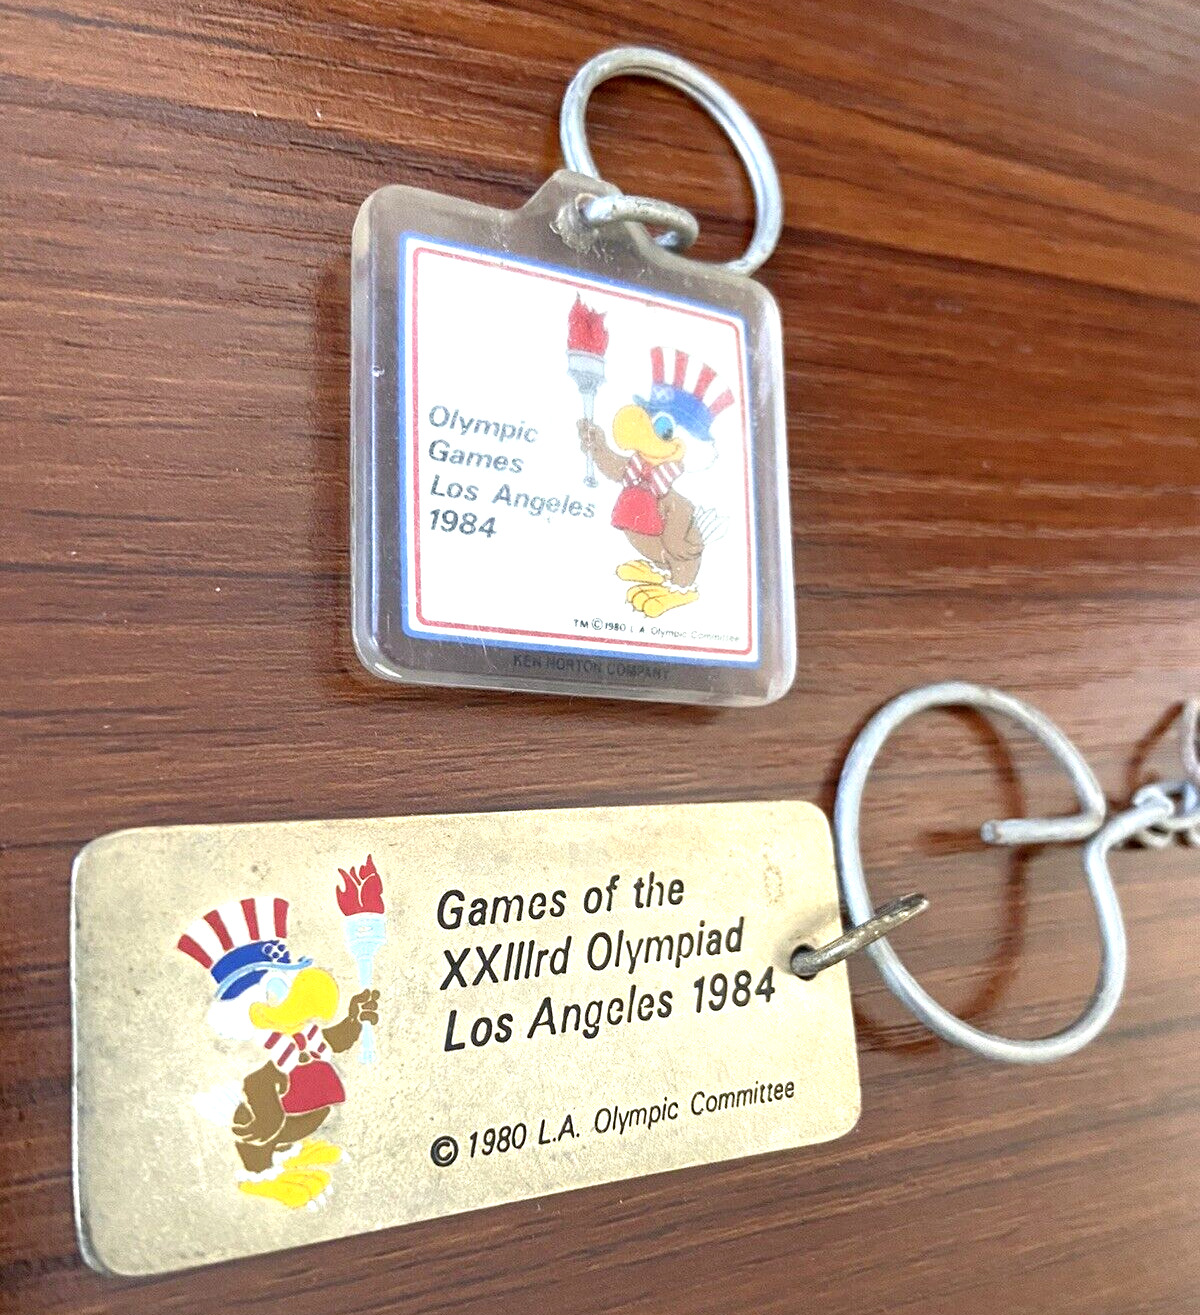 Vintage Olympic Games 1984 keyrings-lot of 2-Los Angeles Olympic Games keychains